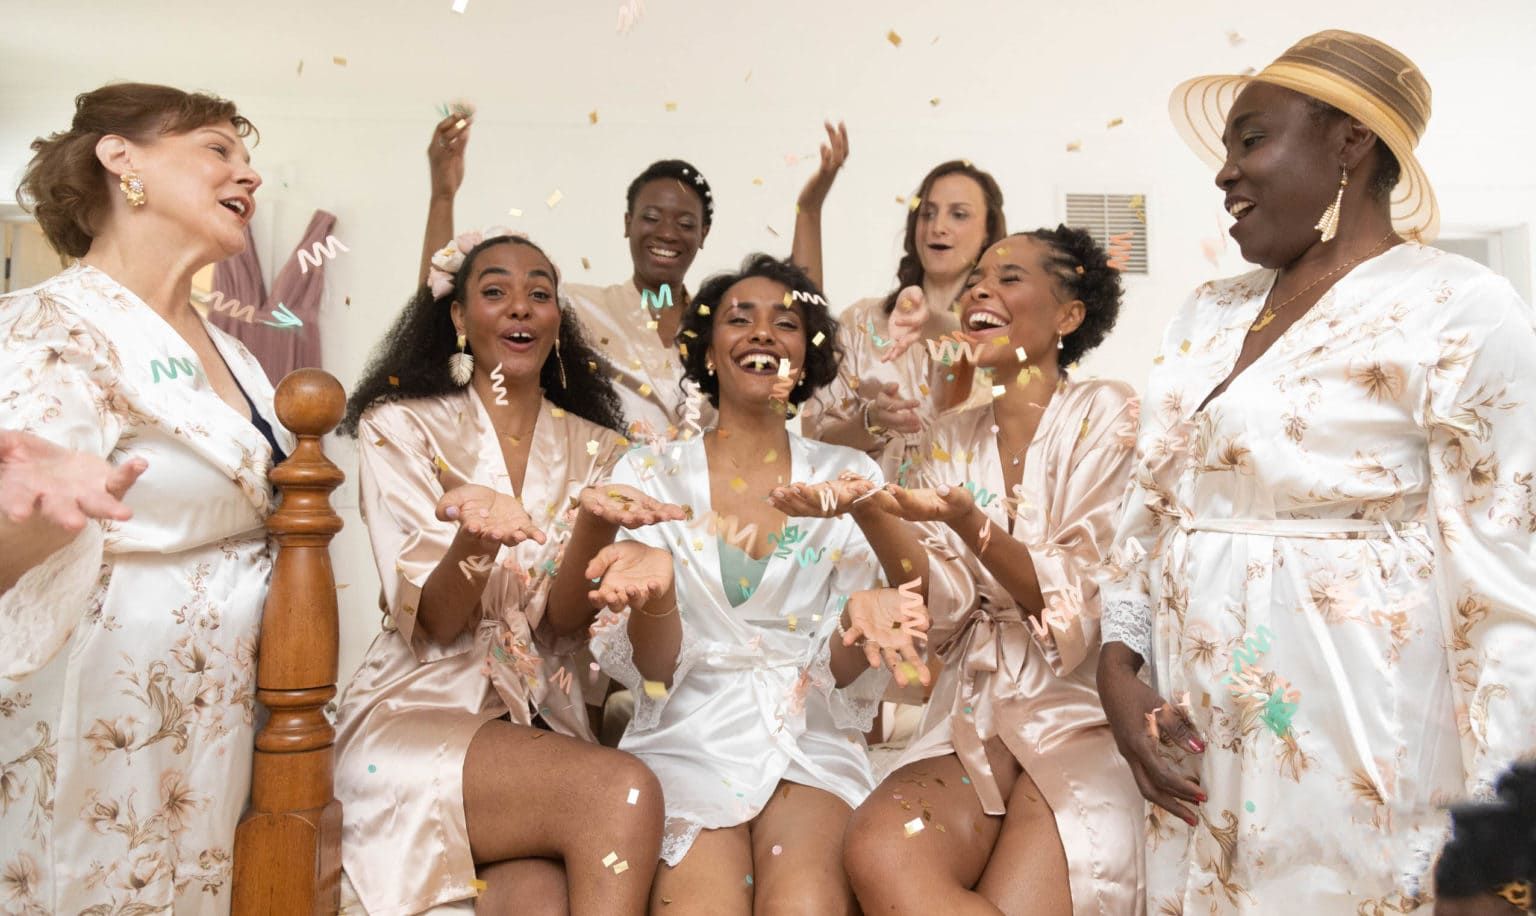 A bride and her bridesmaids are throwing confetti in the air.